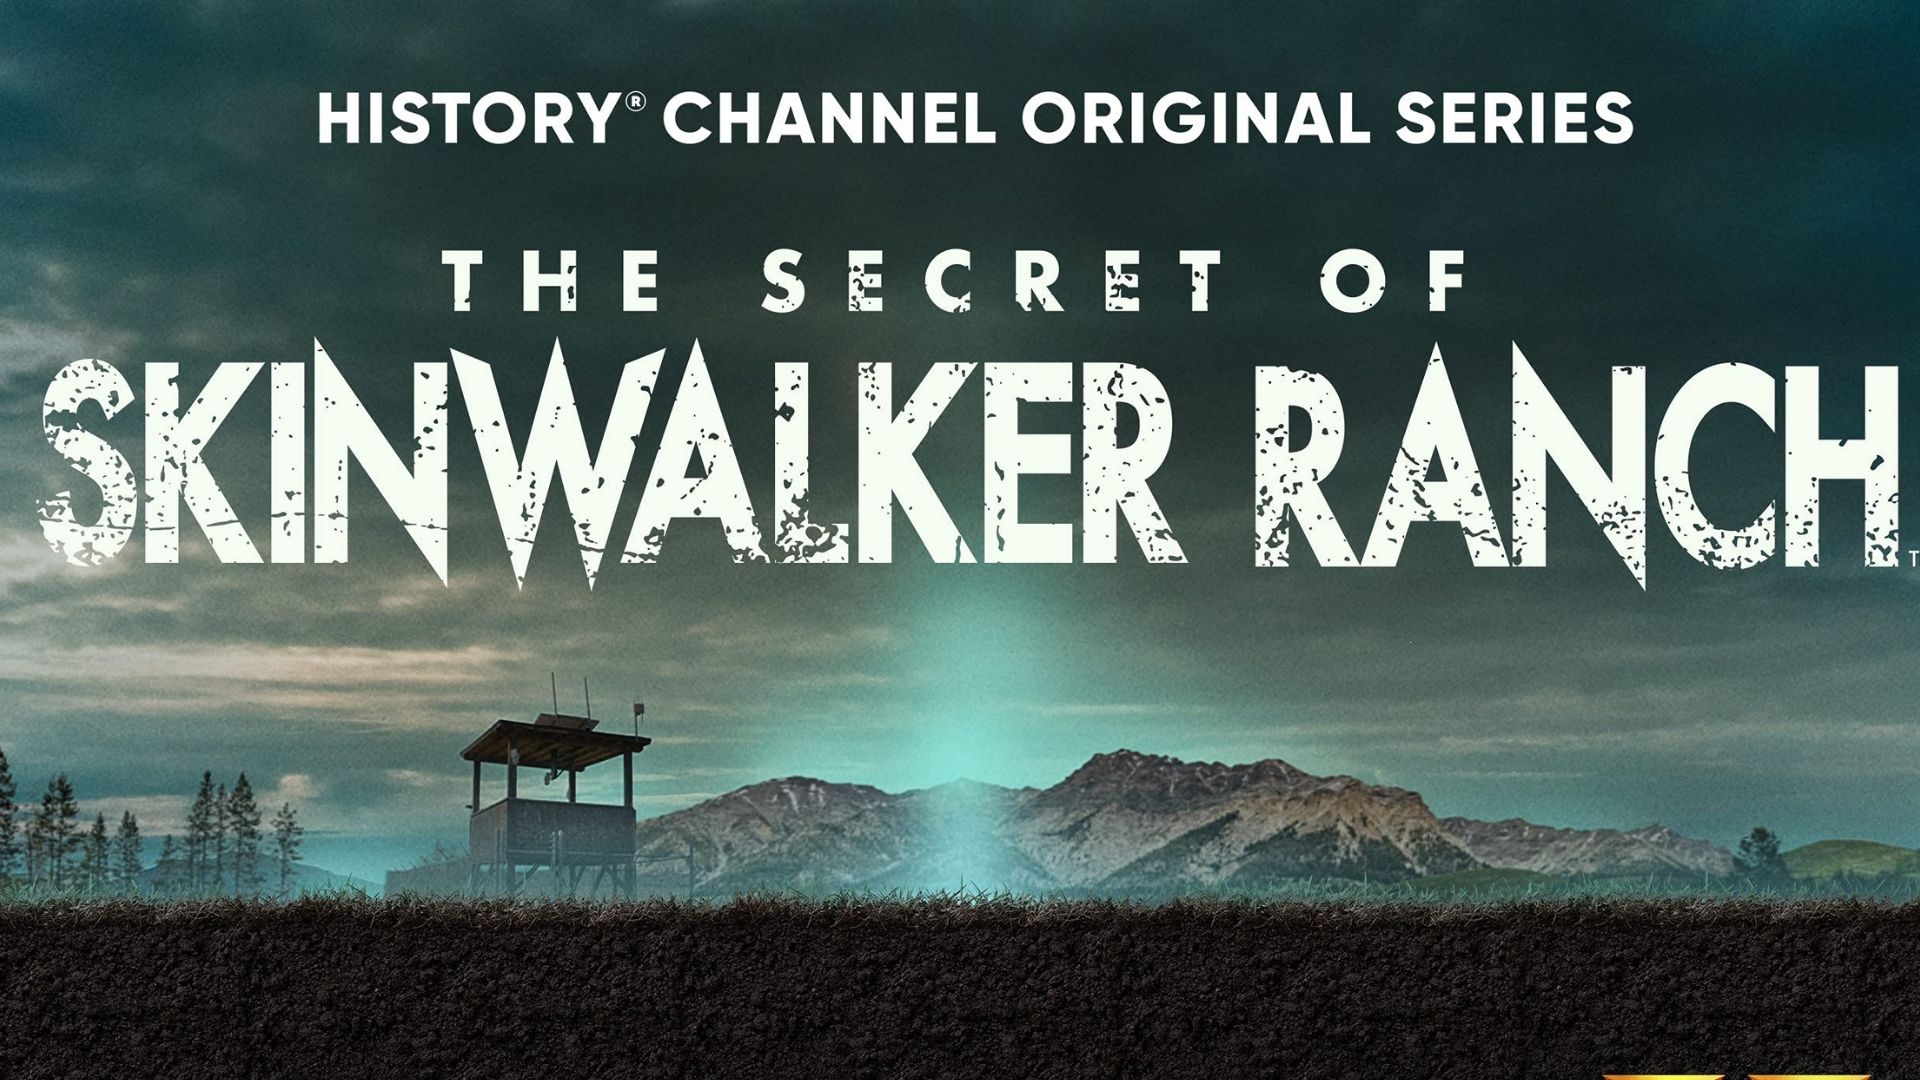 The Secret of Skinwalker Ranch Parents Guide and Age Rating | 2020